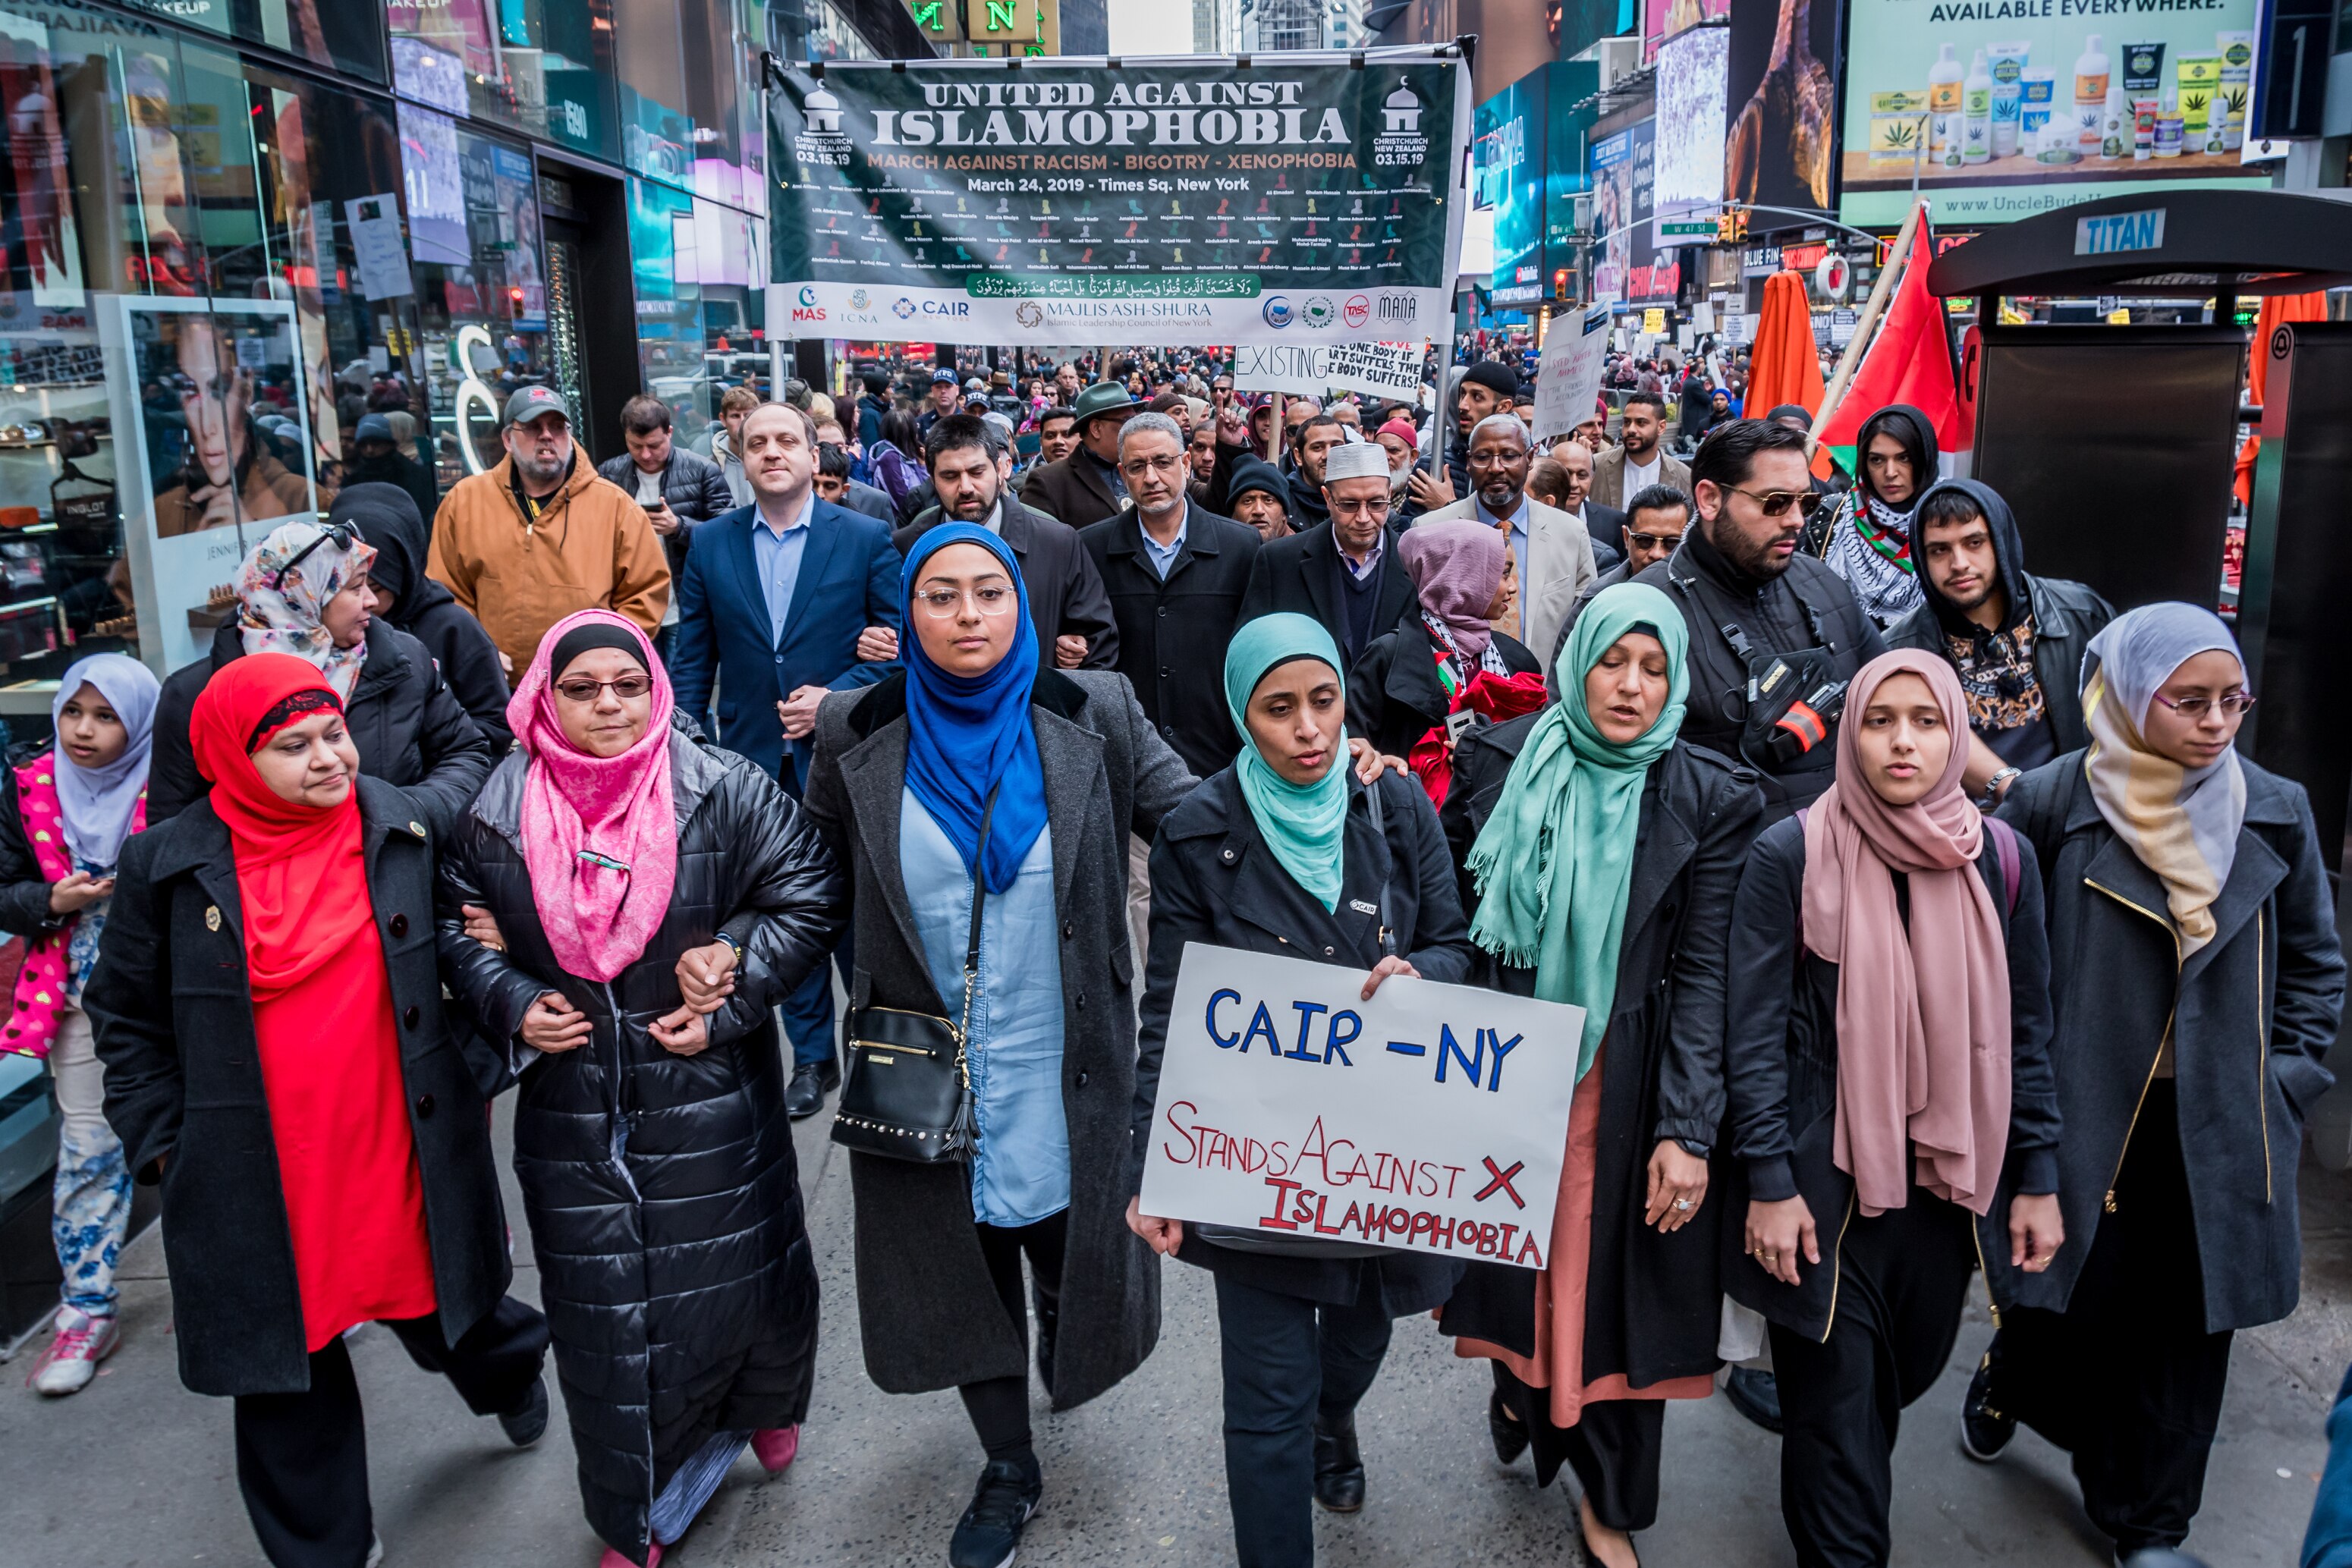 Muslim leaders and allies at a 2019 rally against Islamophobia in New York's Times Square.